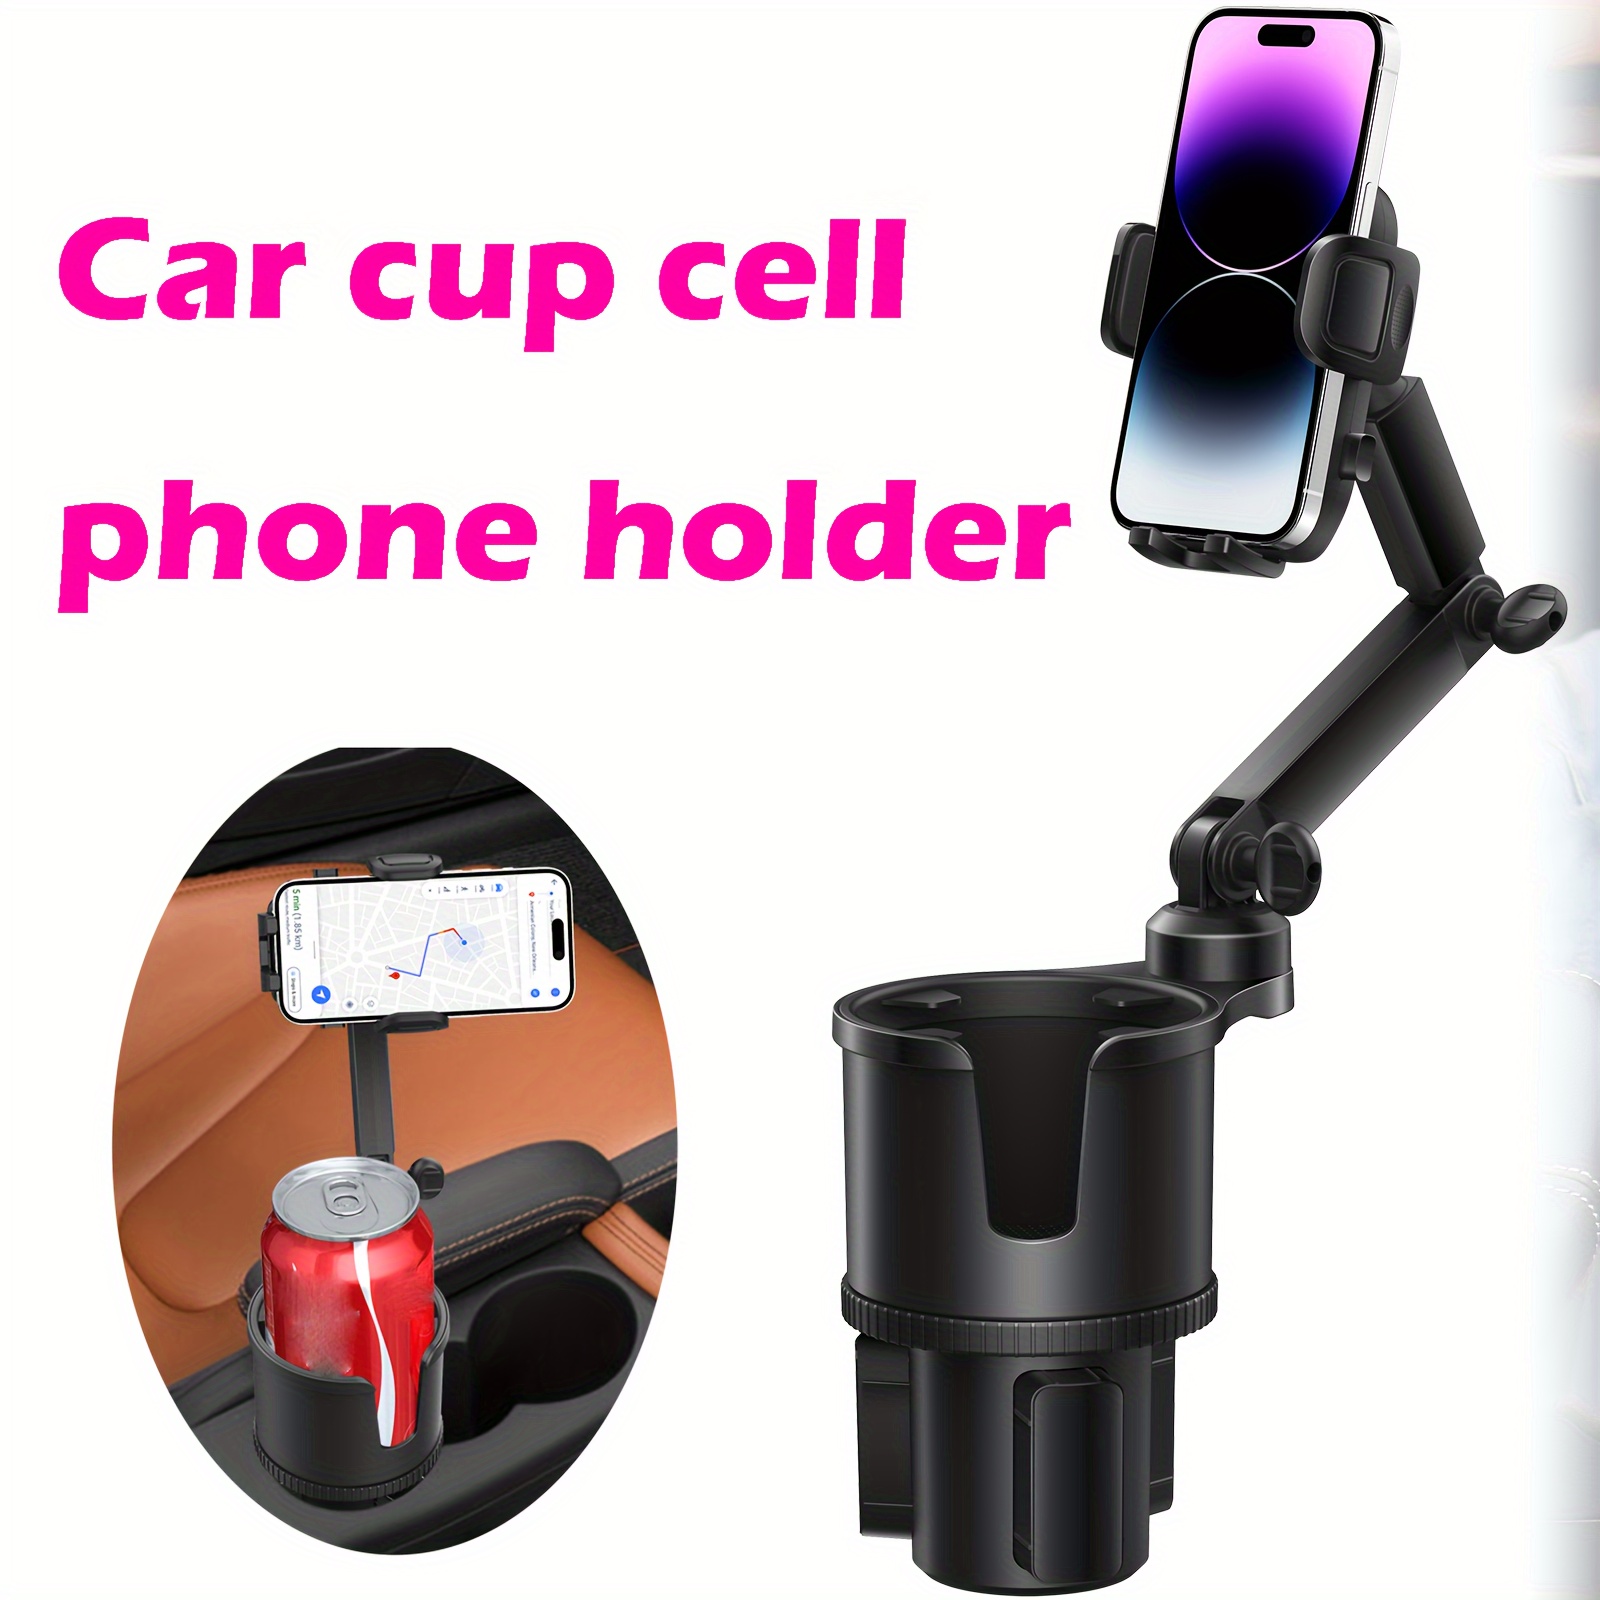 upgraded car cup holder expander cup holder mobile phone bracket oversized cup body car water cup holder mobile phone holder